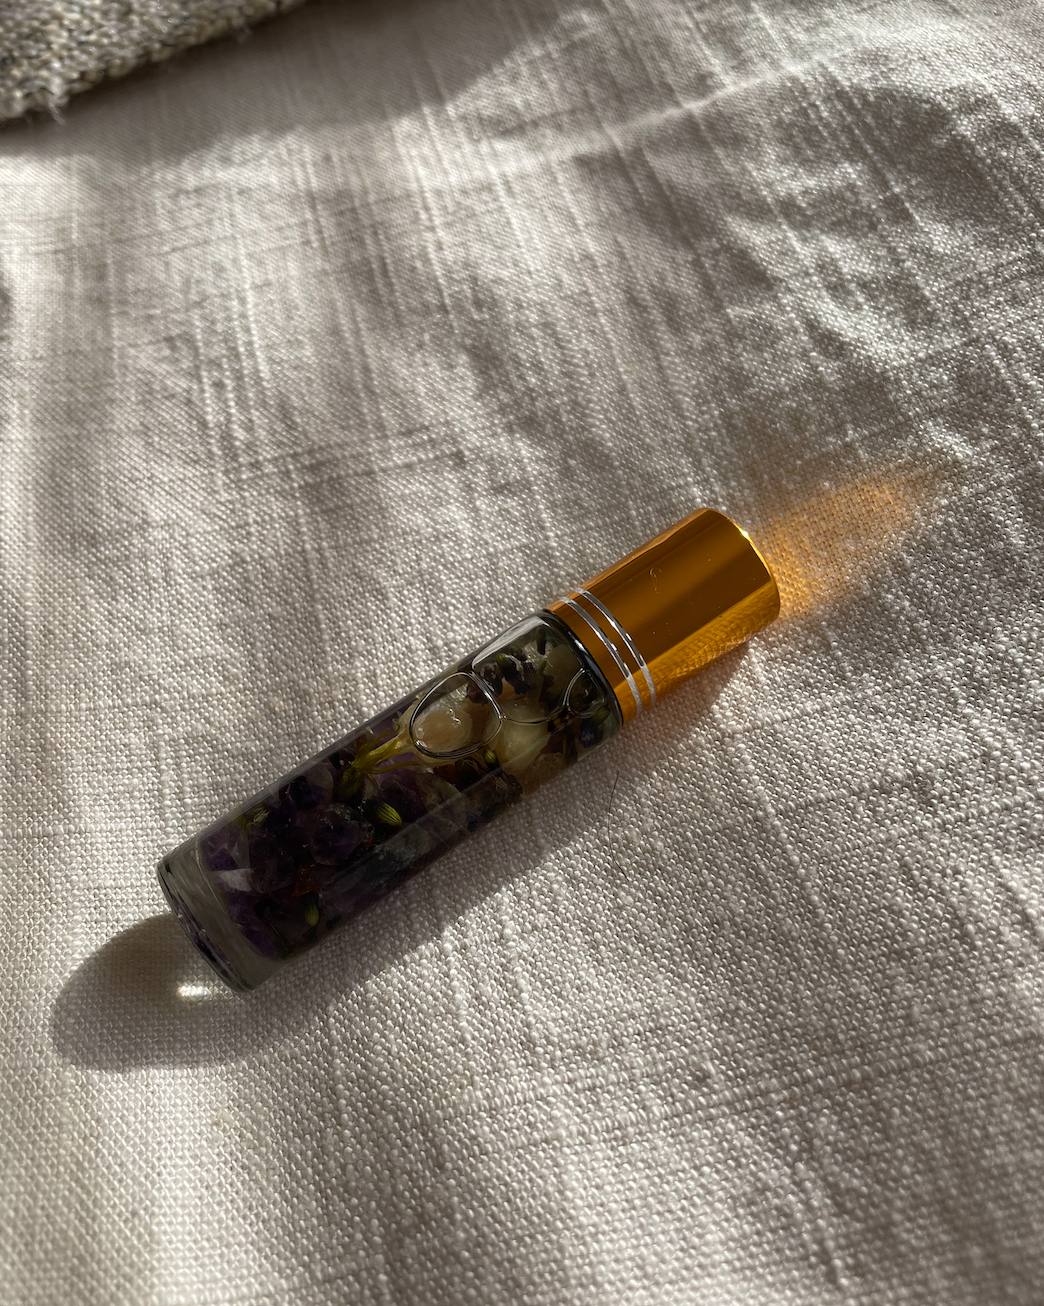 After Dawn Aromatherapy Essential Oil Roll On